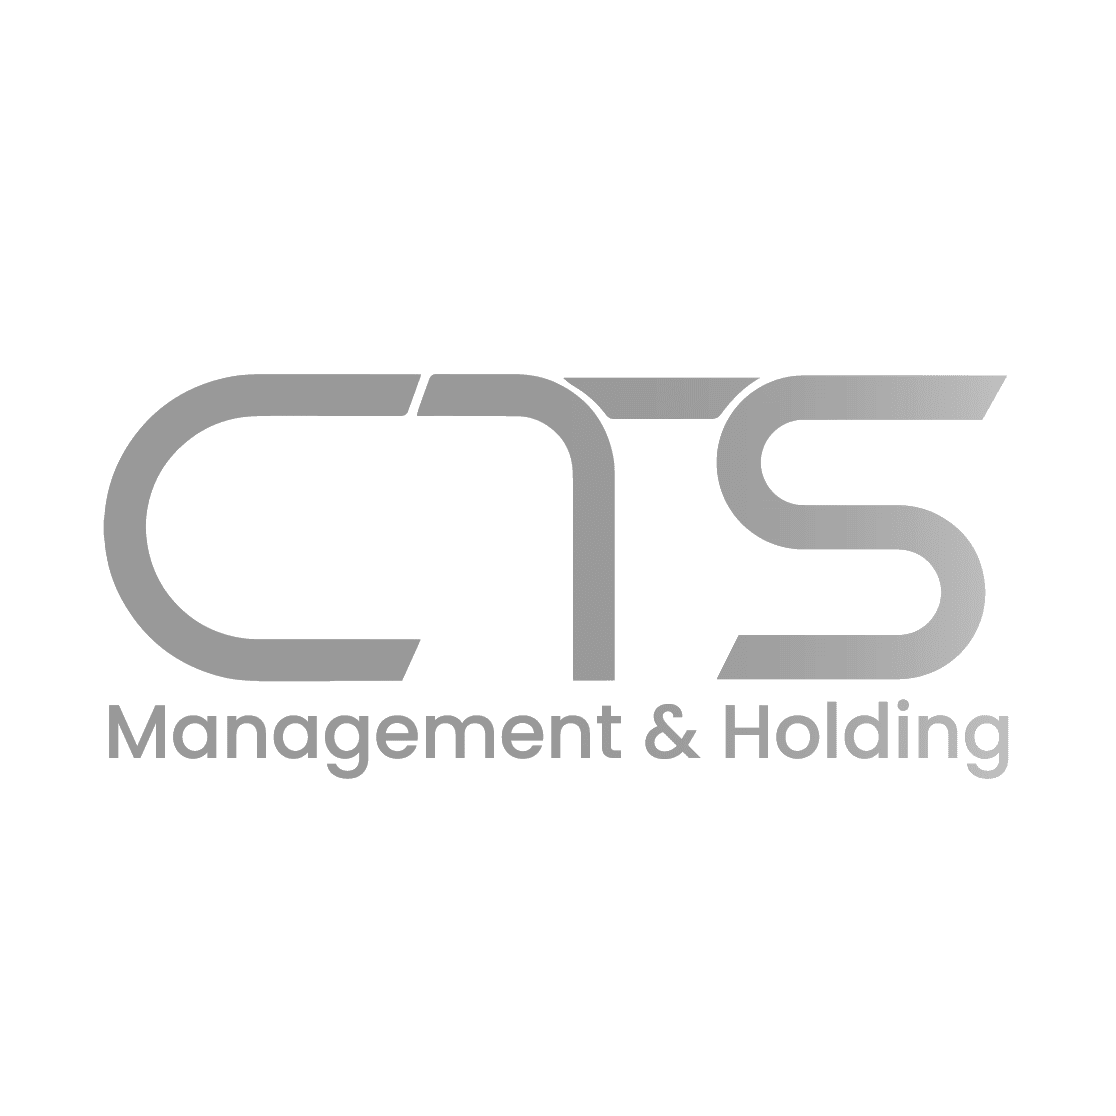 CTS Management & Holding AG